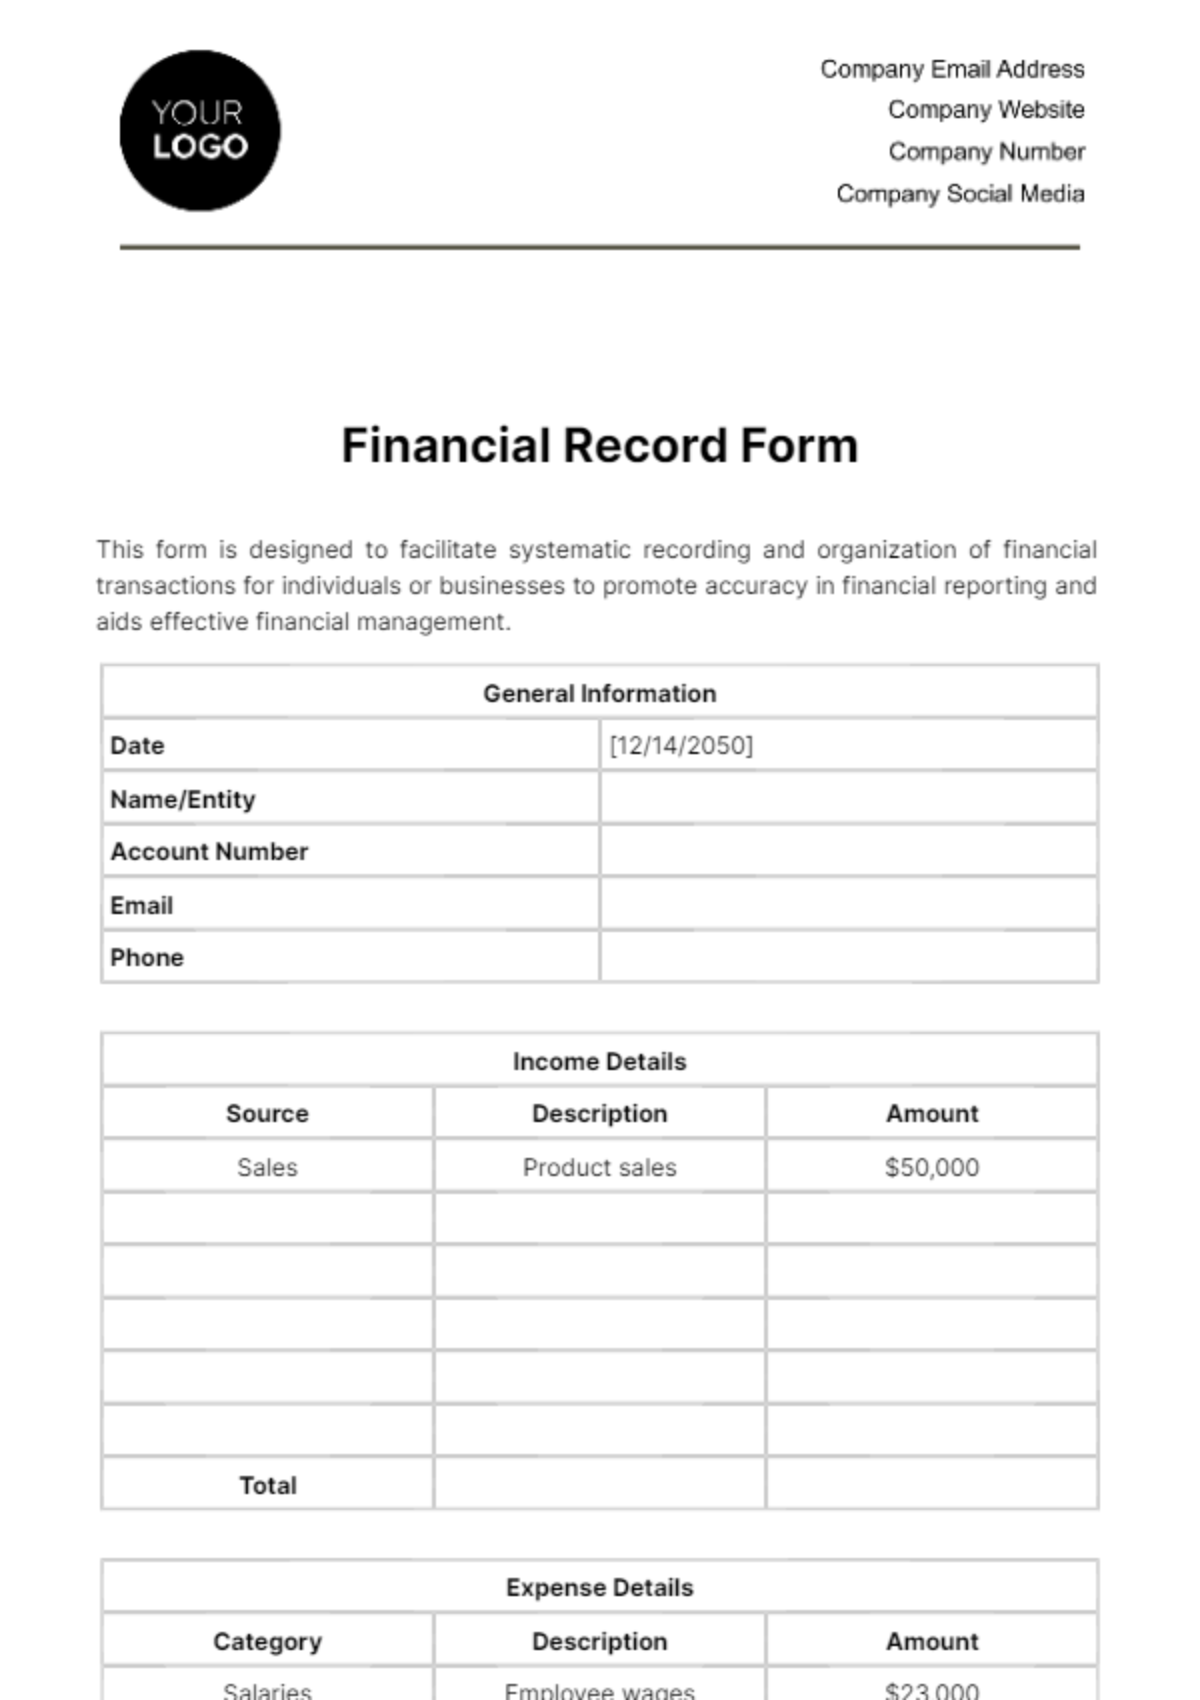 Financial Record Form Template